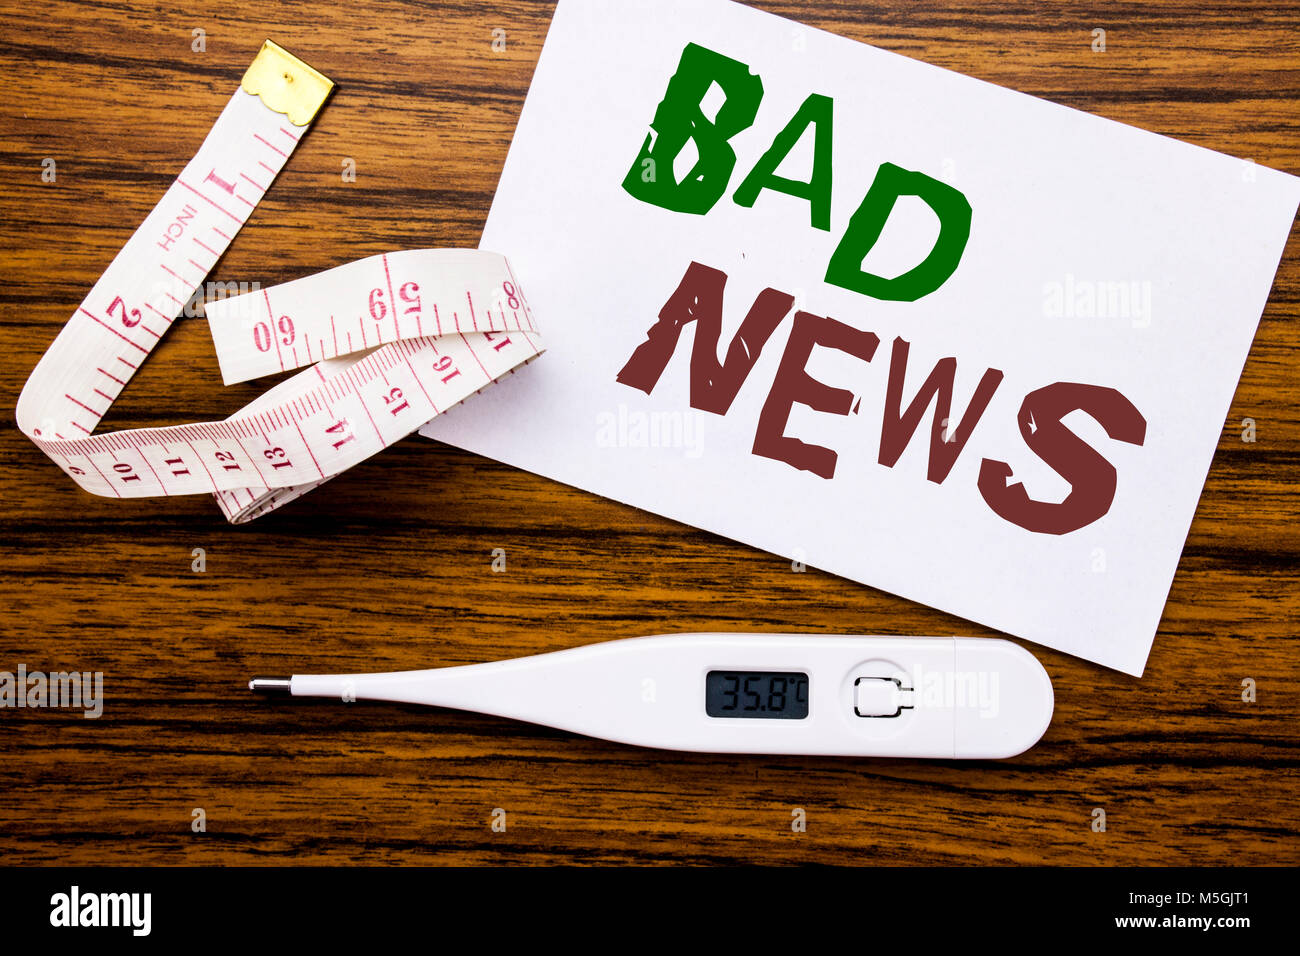 Conceptual hand writing text caption showing Bad News. Business concept for Failure Media Newspaper written on sticky note paper wood background. Mete Stock Photo